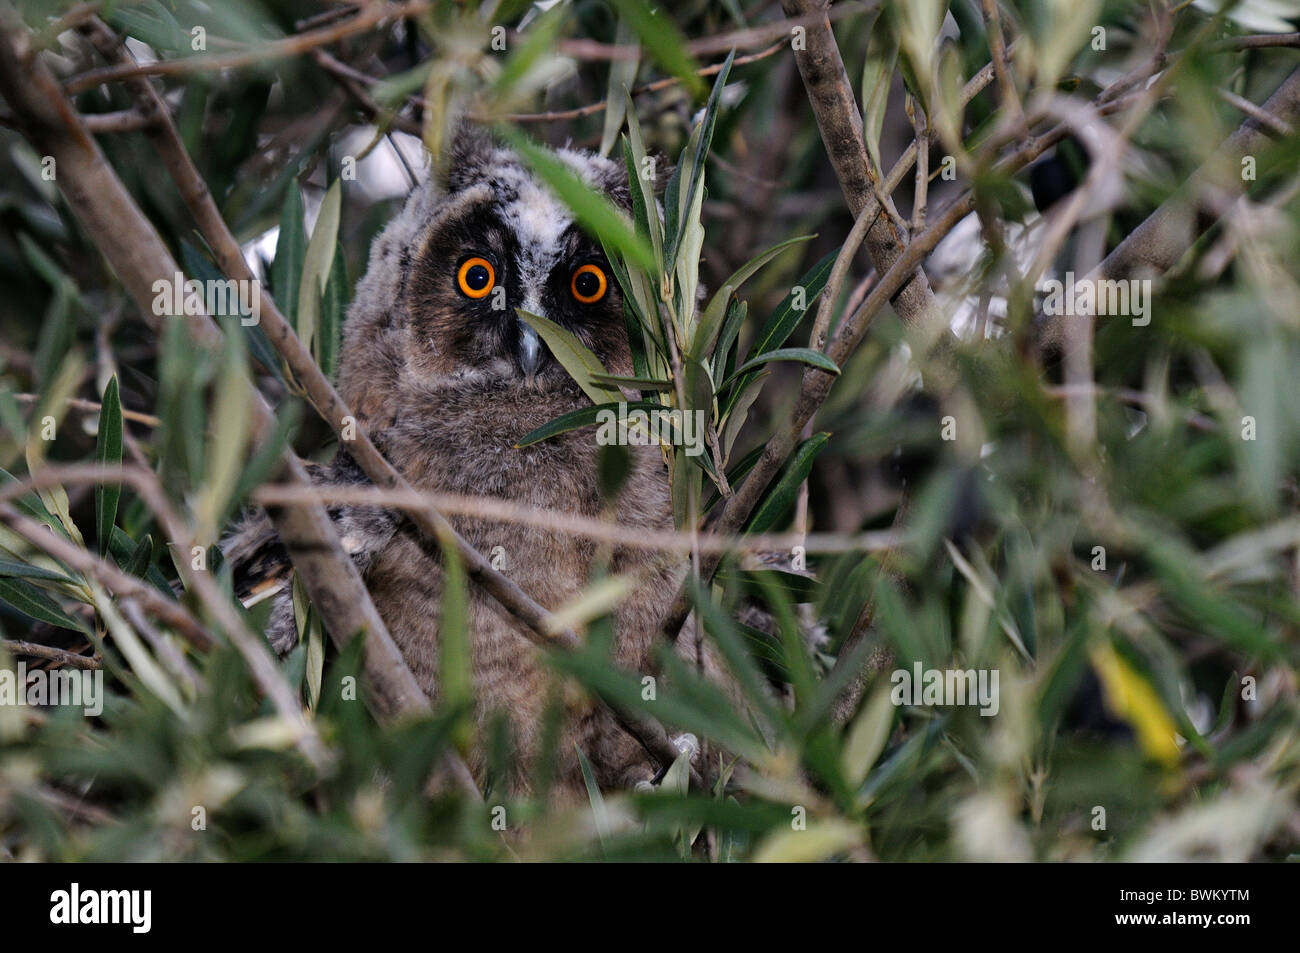 Chick of Long-eared owl (Asio otus) tries to hide between the branches of the olive tree Stock Photo